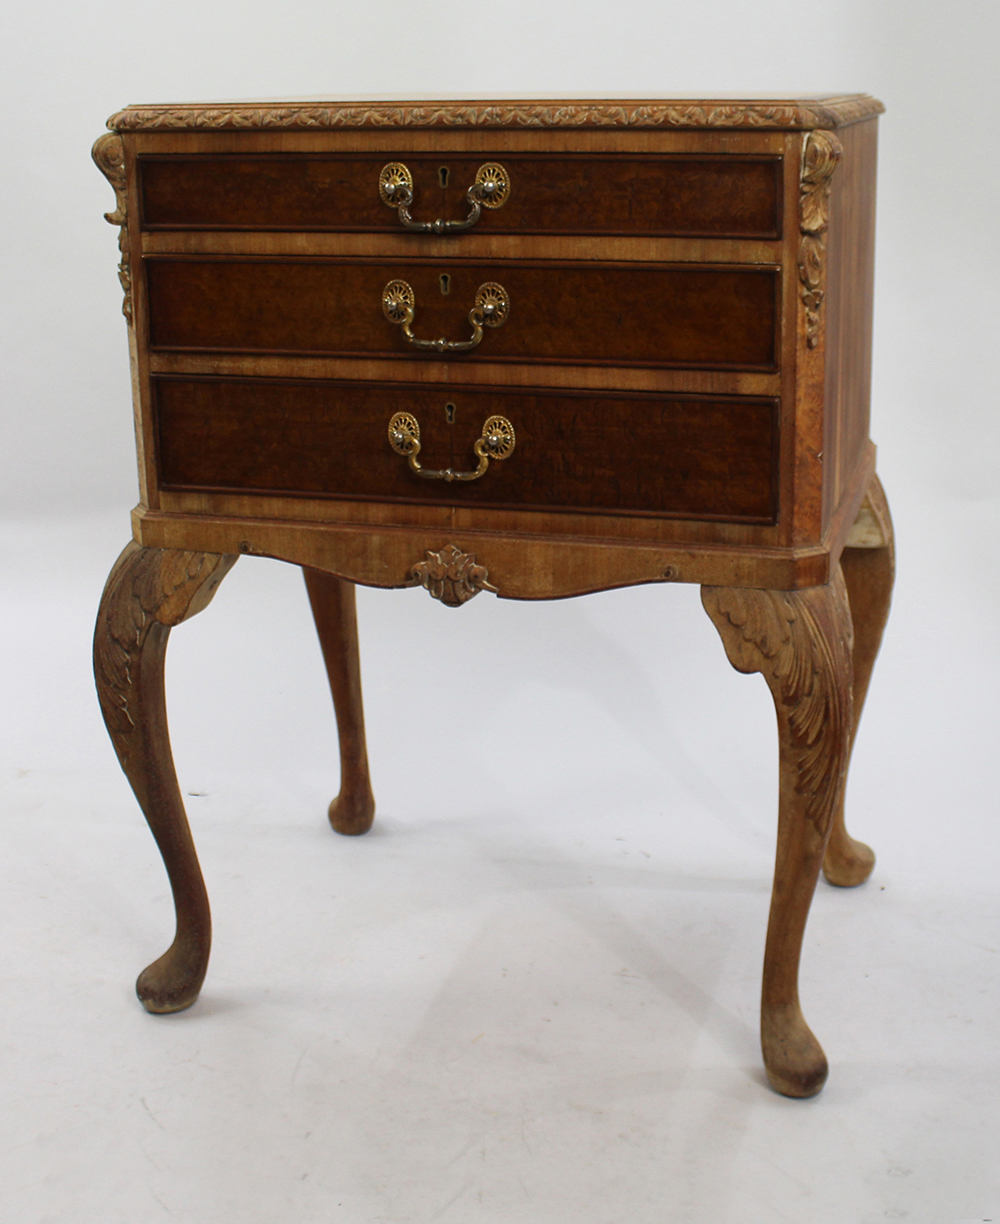 Early 20th c. Carved Walnut Footed Cutlery Chest - Image 2 of 6